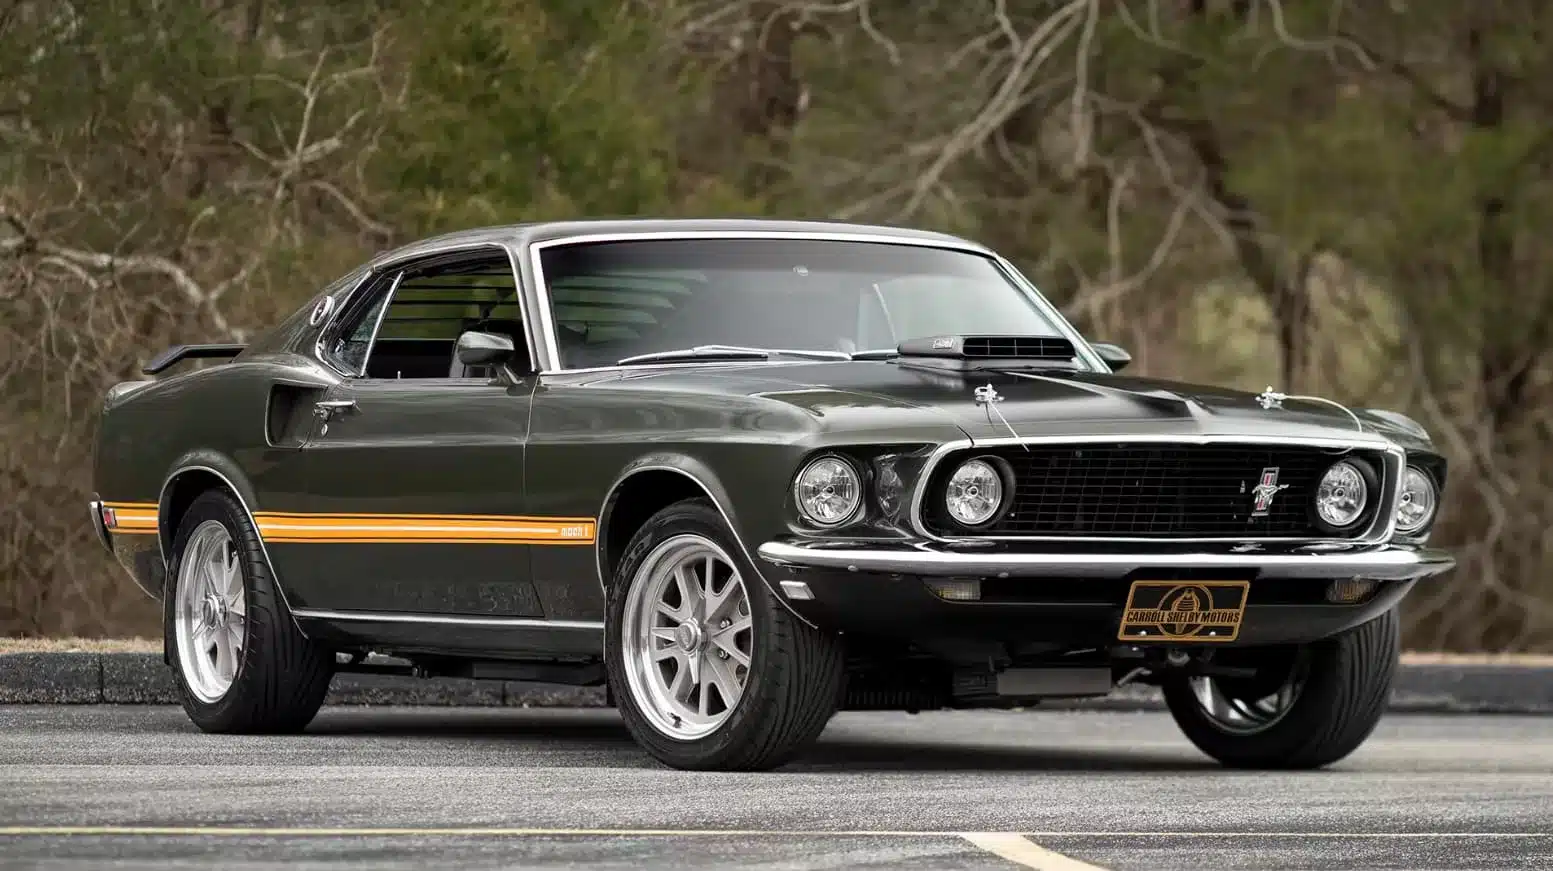 A Rare Gem: The 1969 Ford Mustang Mach 1 Fastback